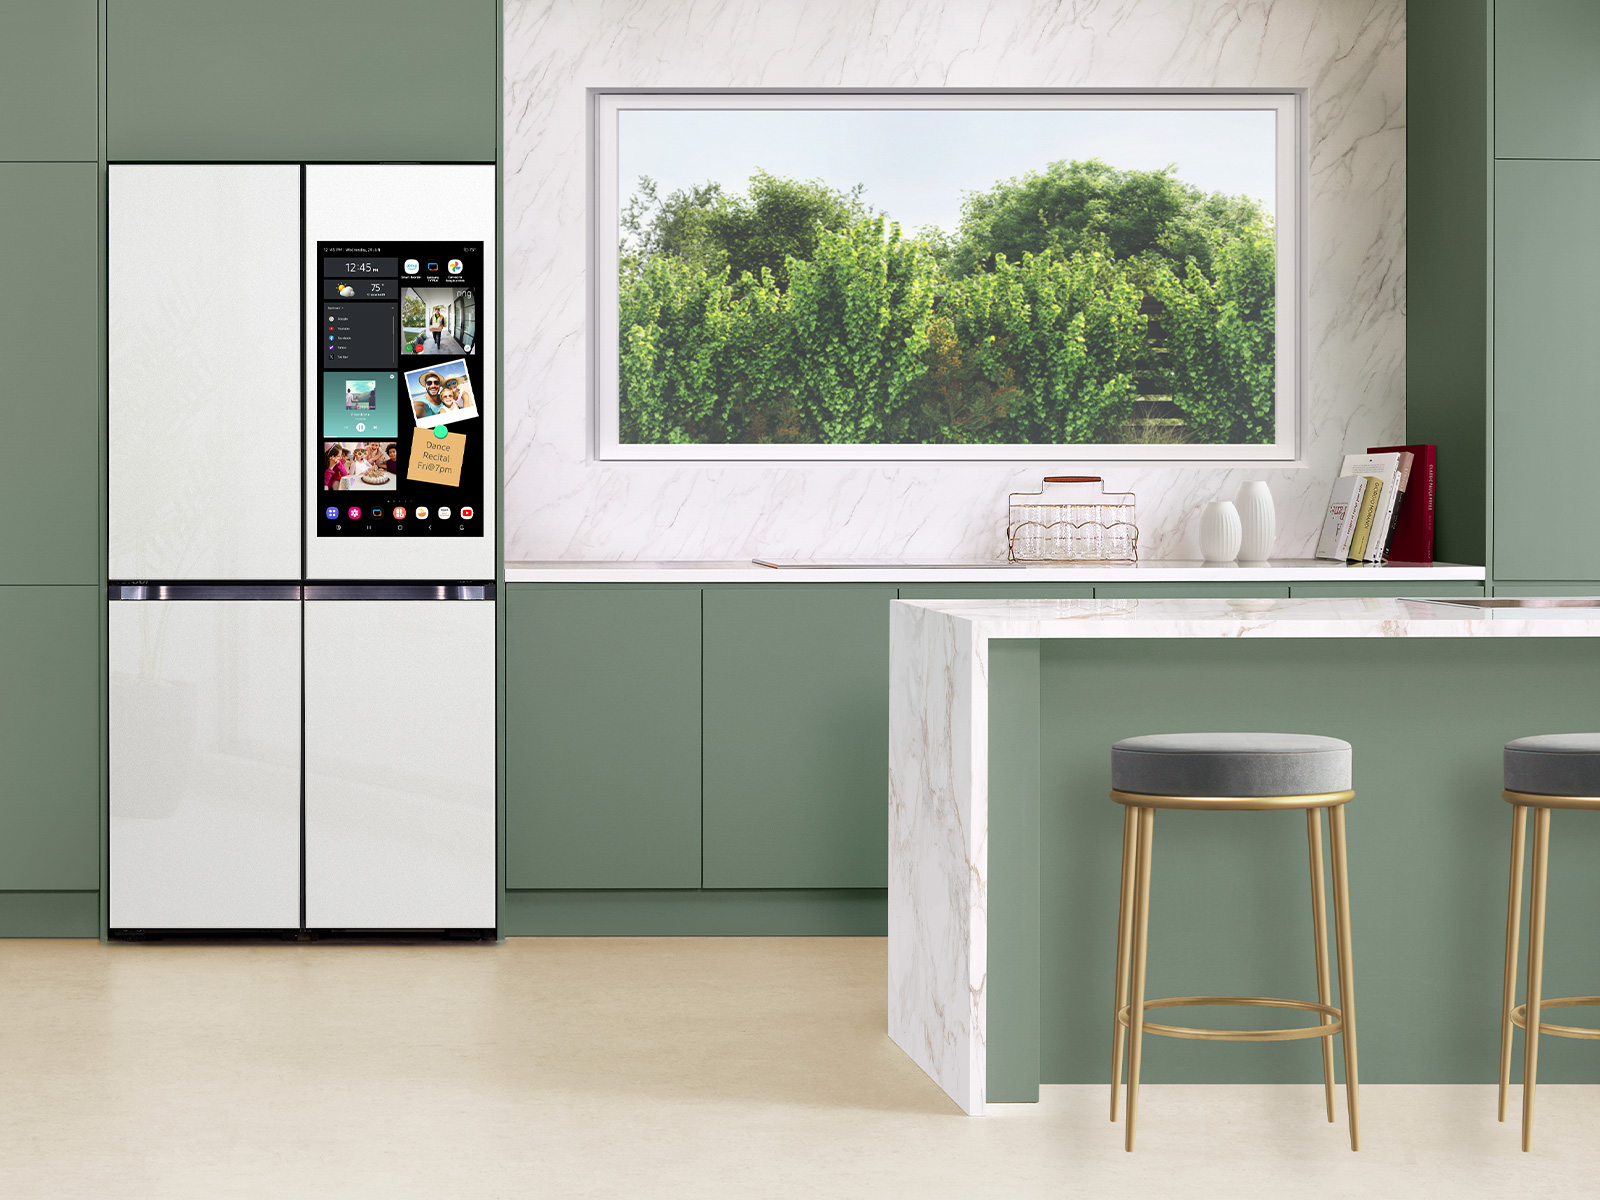 Thumbnail image of Bespoke 4-Door Flex&trade; Refrigerator (29 cu. ft.) with AI Family Hub&trade;+ and AI Vision Inside&trade; in White Glass